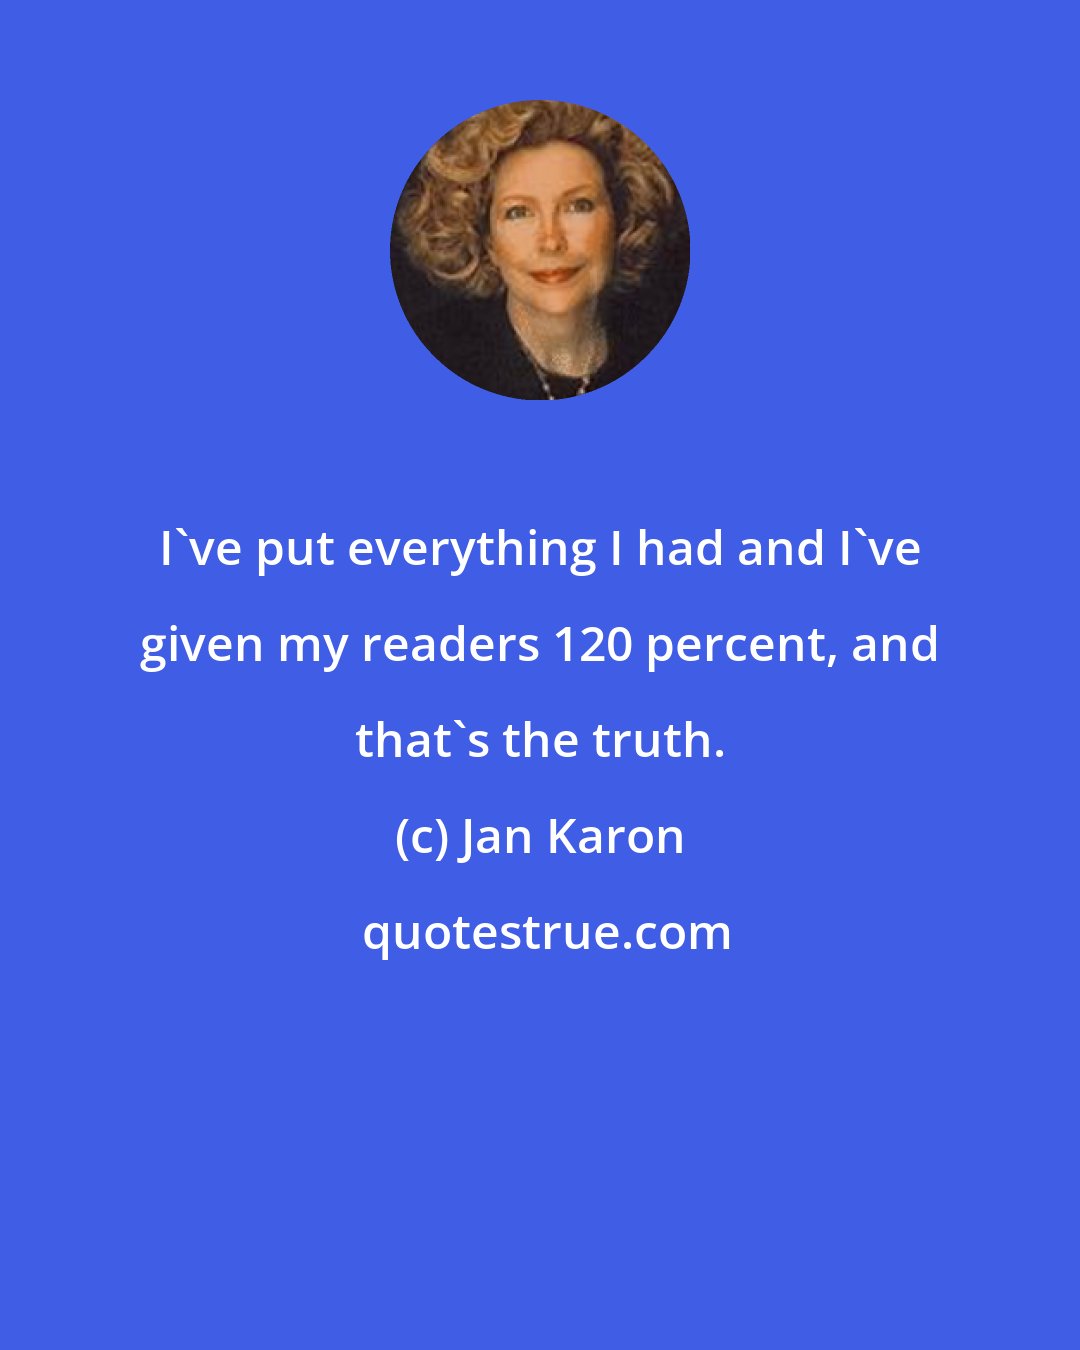 Jan Karon: I've put everything I had and I've given my readers 120 percent, and that's the truth.